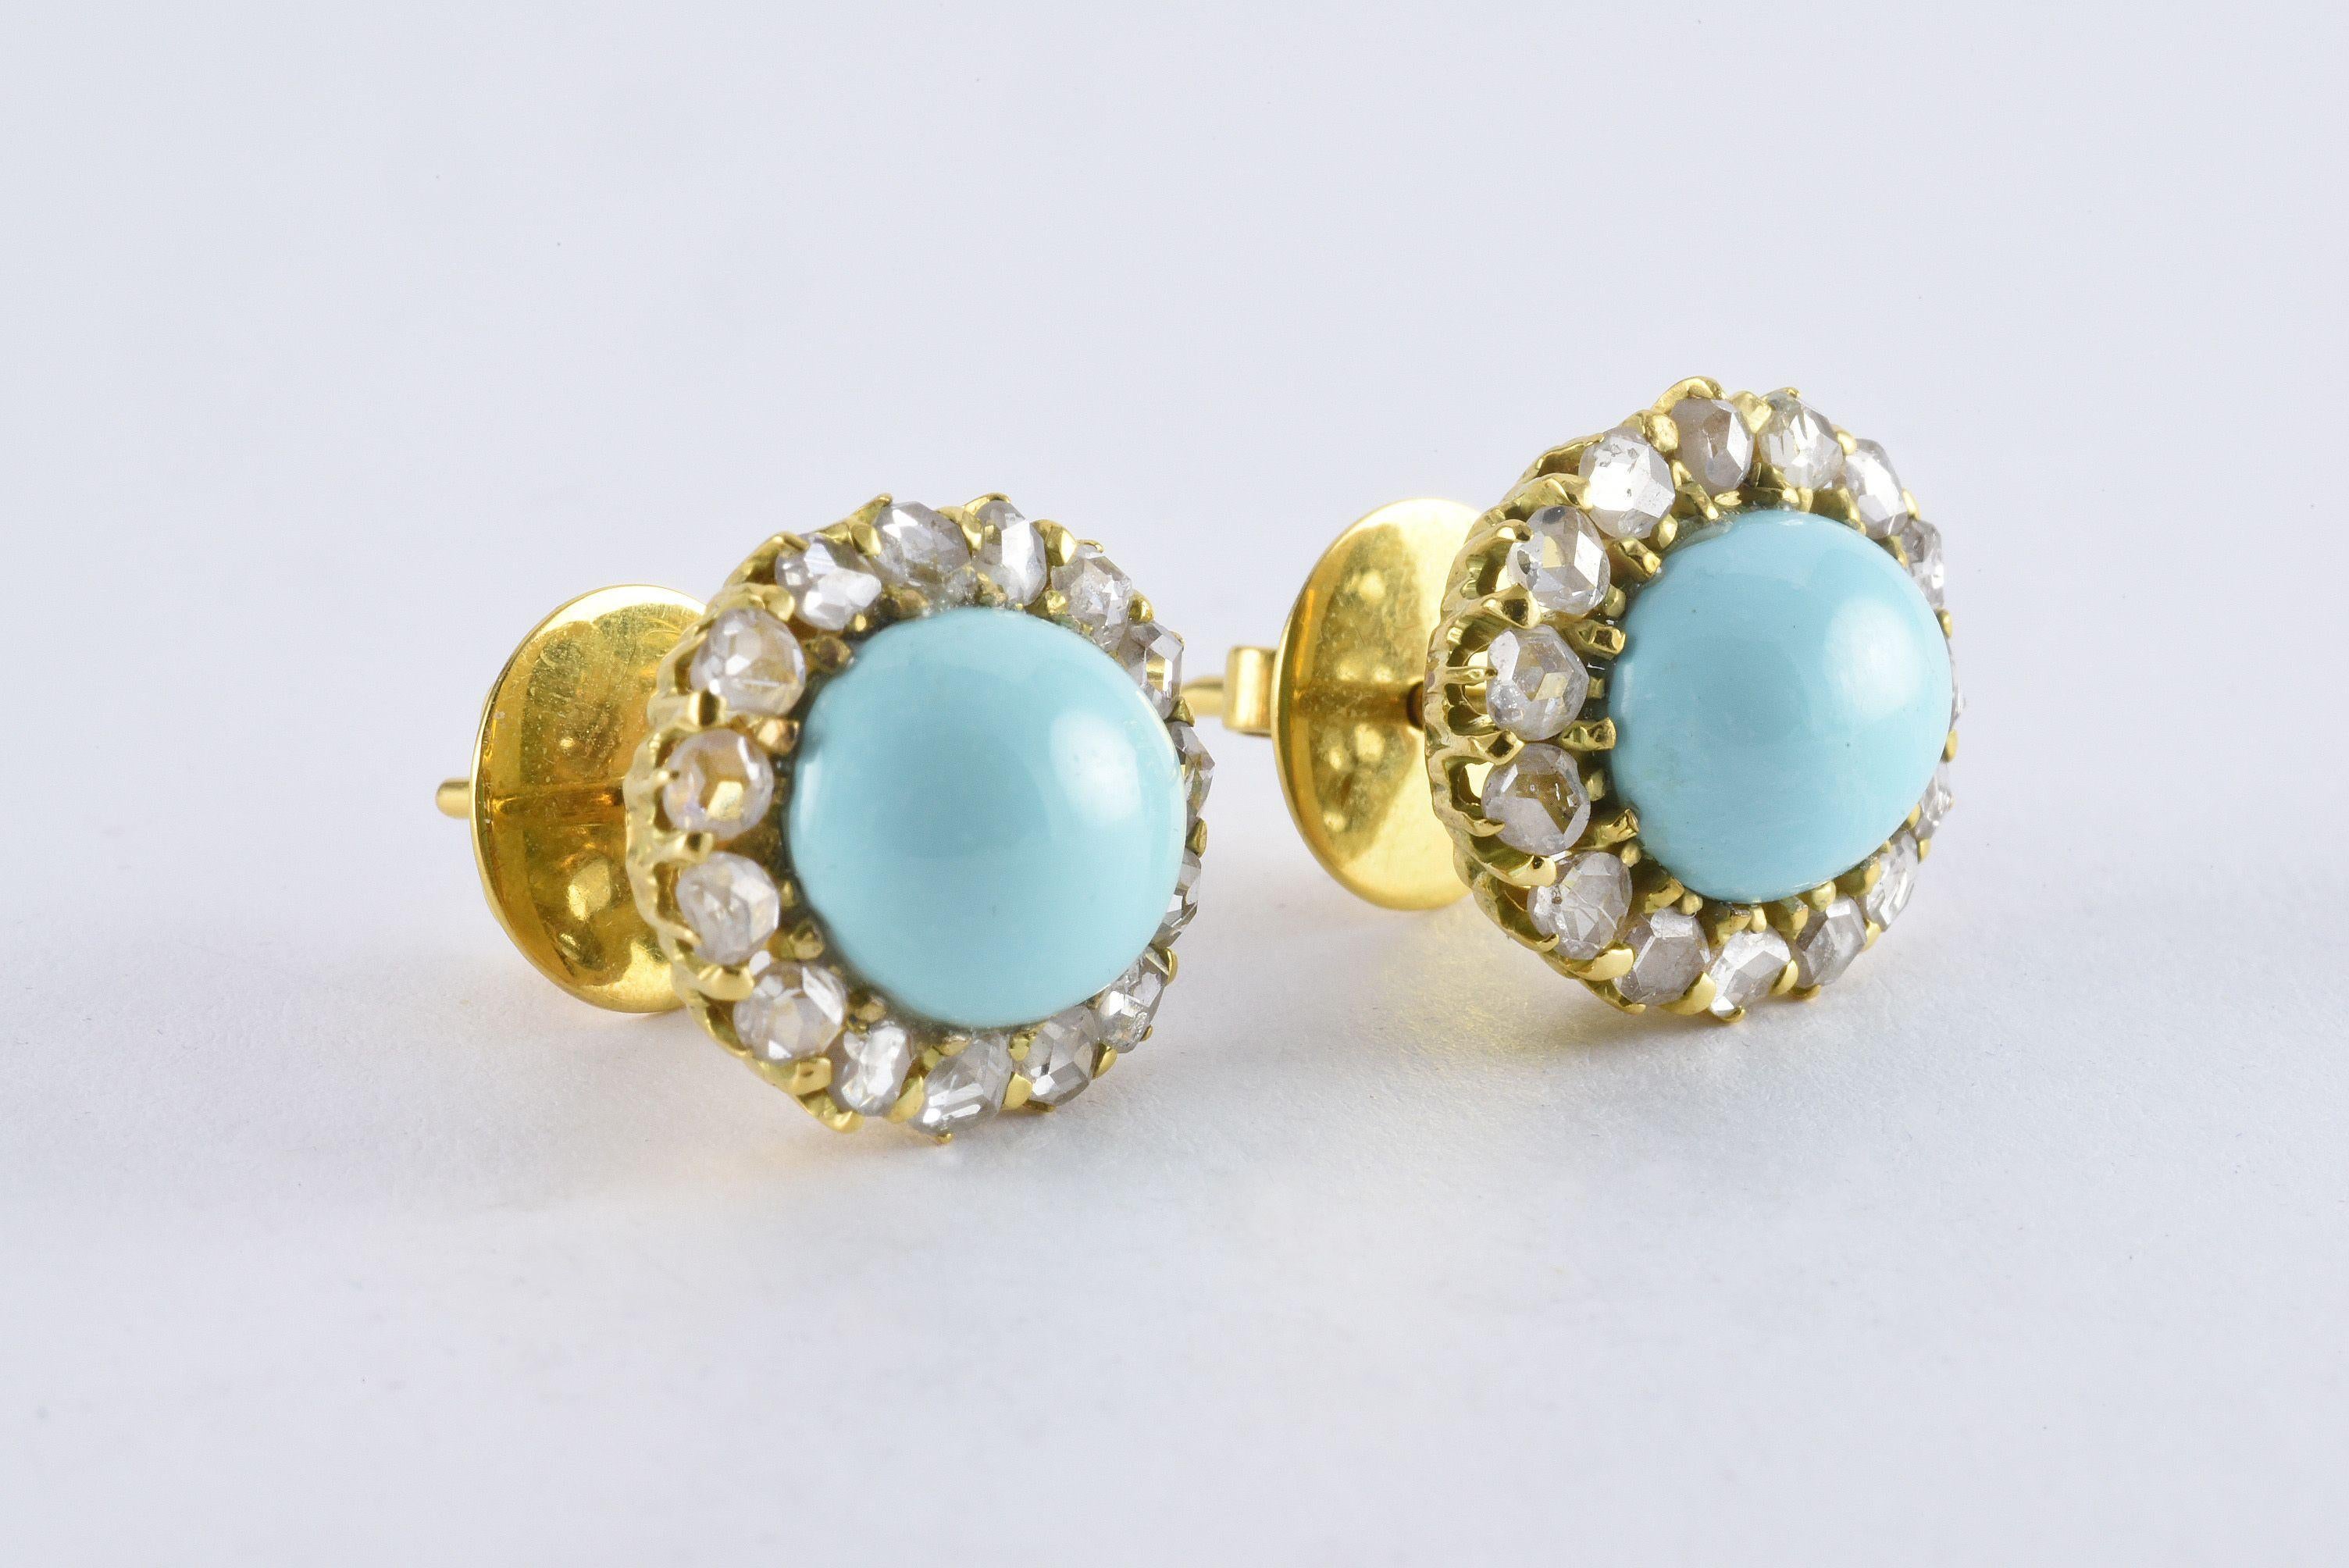 These beautiful Victorian 18kt yellow gold earrings feature two natural oval-shaped Persian turquoise cabochons measuring 10 mm x 11.5 mm surrounded by thirty rose-cut diamonds totaling approximately 1.00 carat. The earrings measure 17.20 mm x 15.5